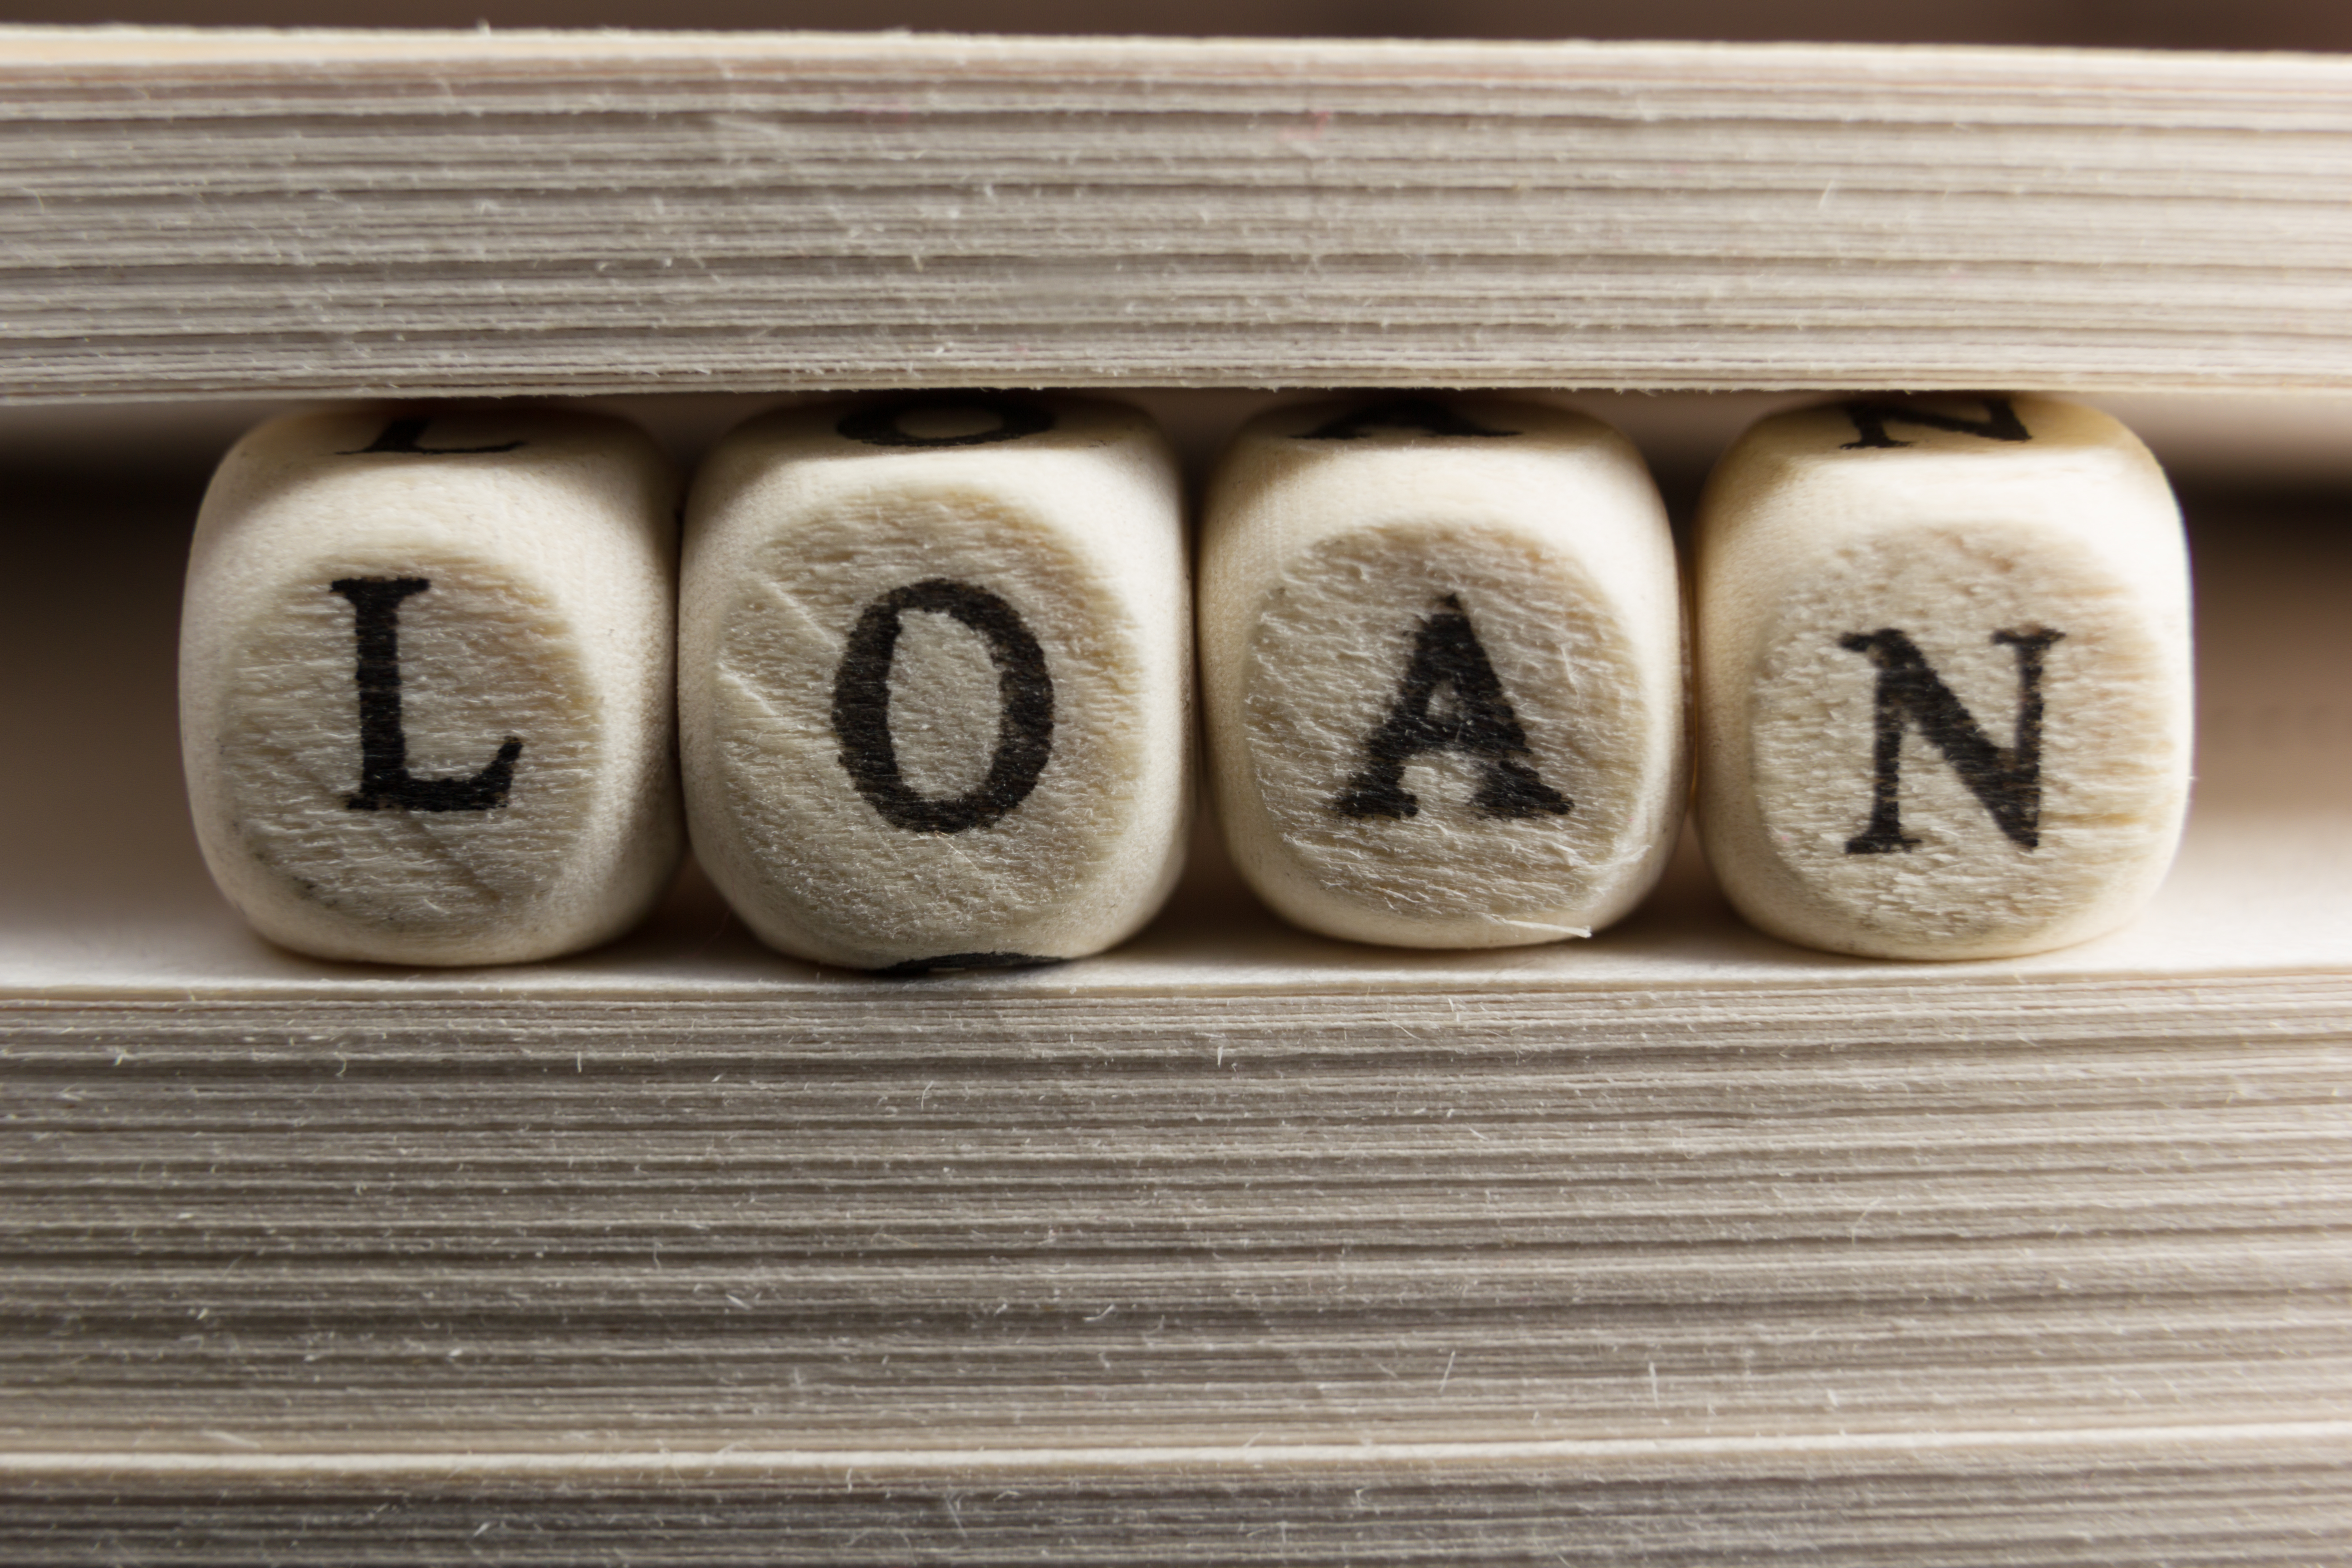 Get Loan Relief Document Preparation From National Student Aid Care. Call Us At 8883507549